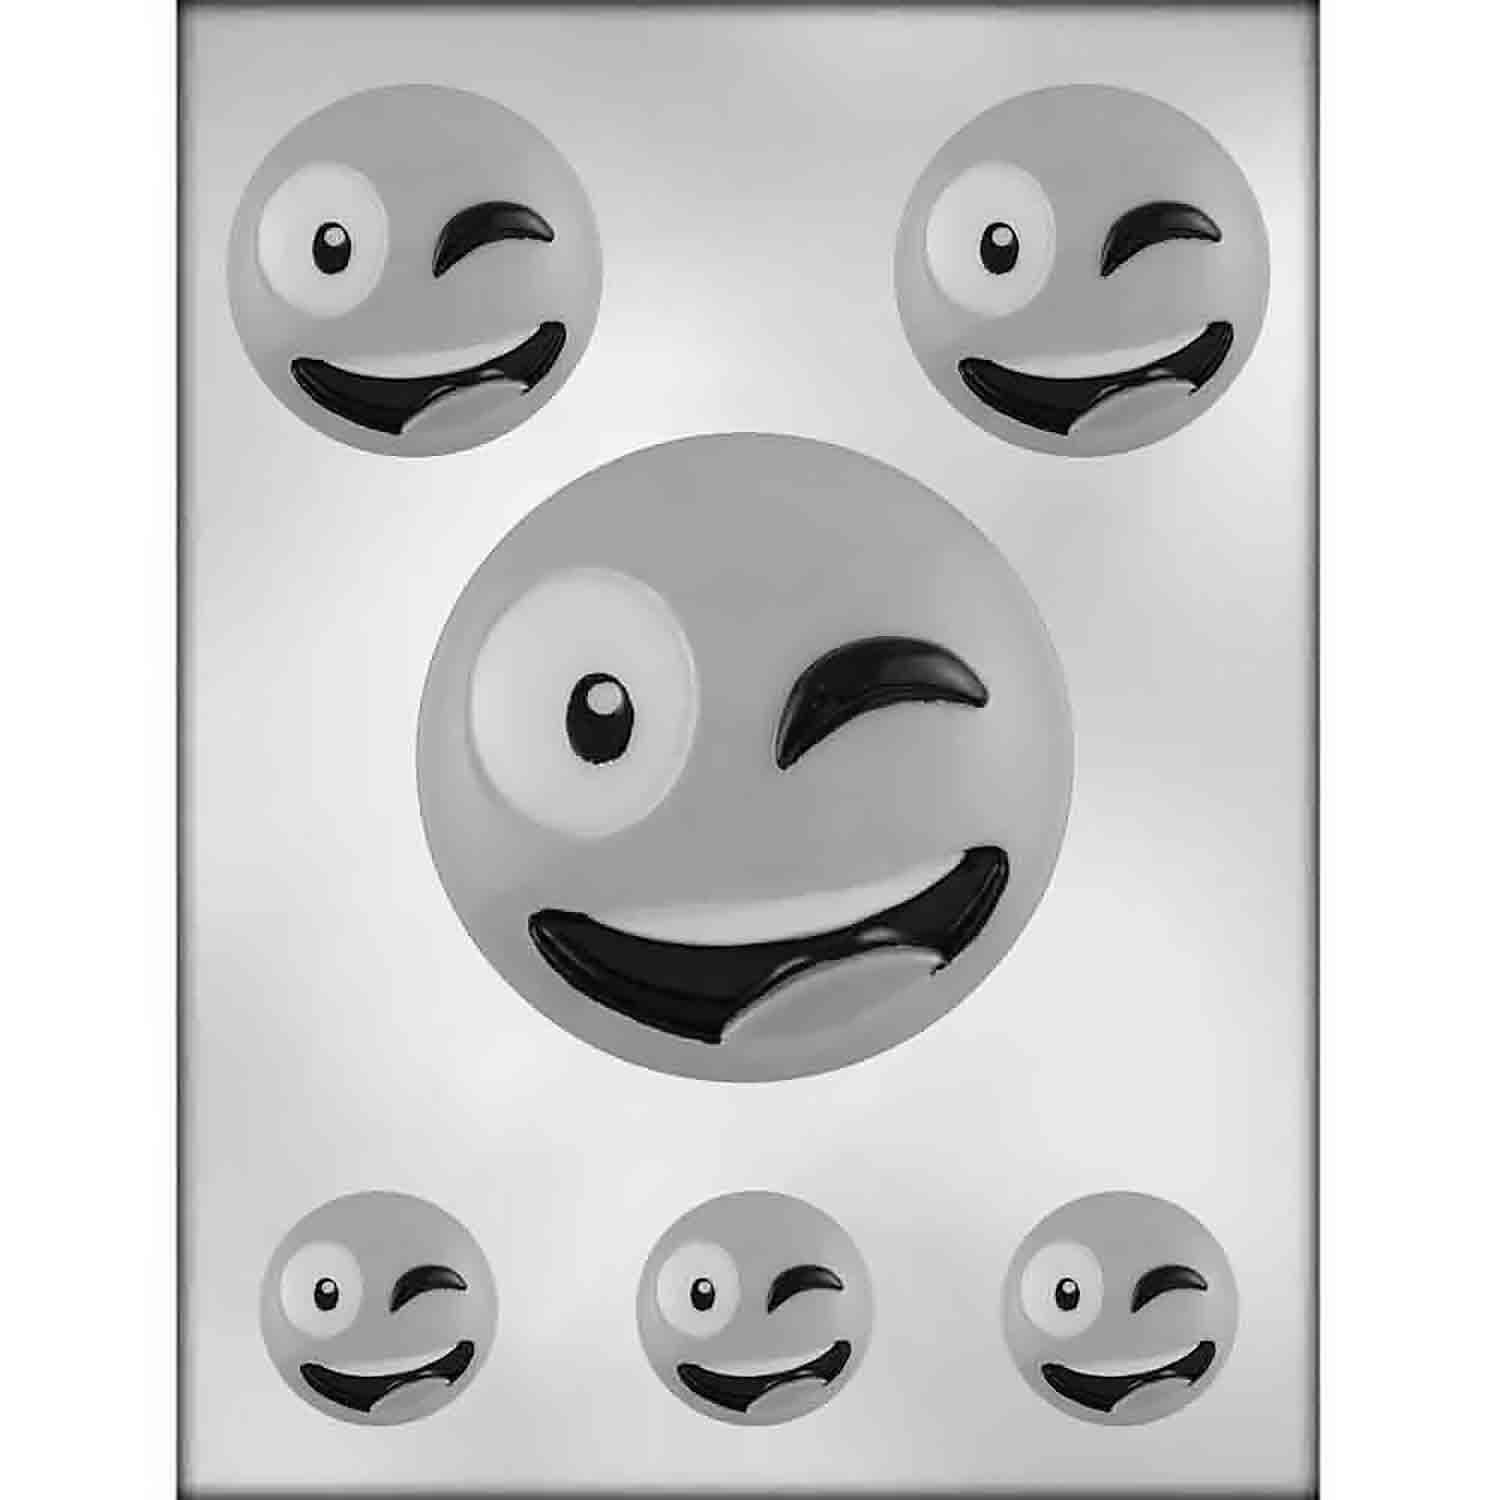 Wink Expression Chocolate Candy Mold